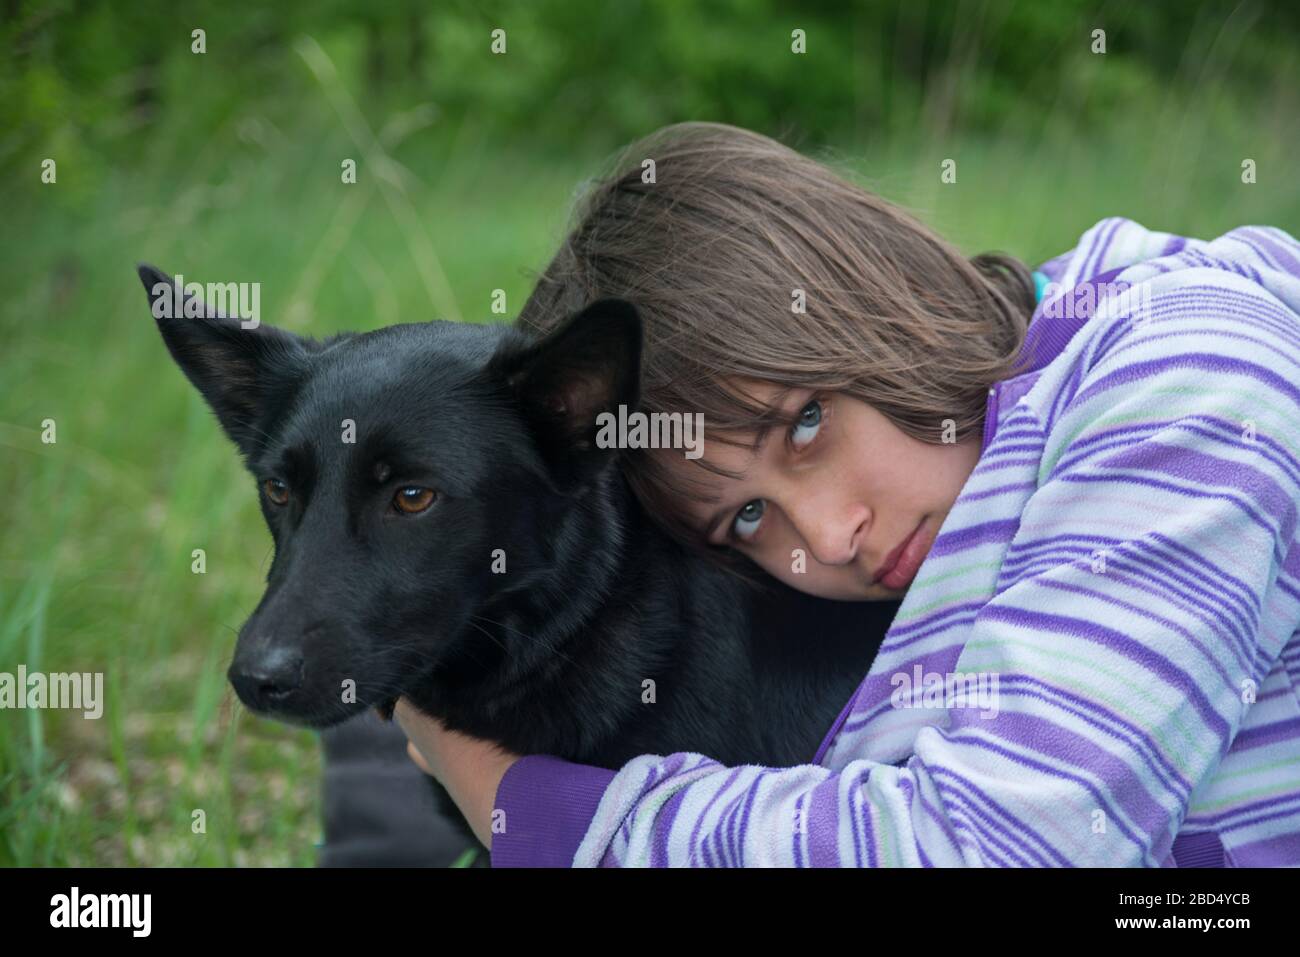 The girl  takes in arms black dog (her pet). Child and animal is situated against natural green background. Stock Photo